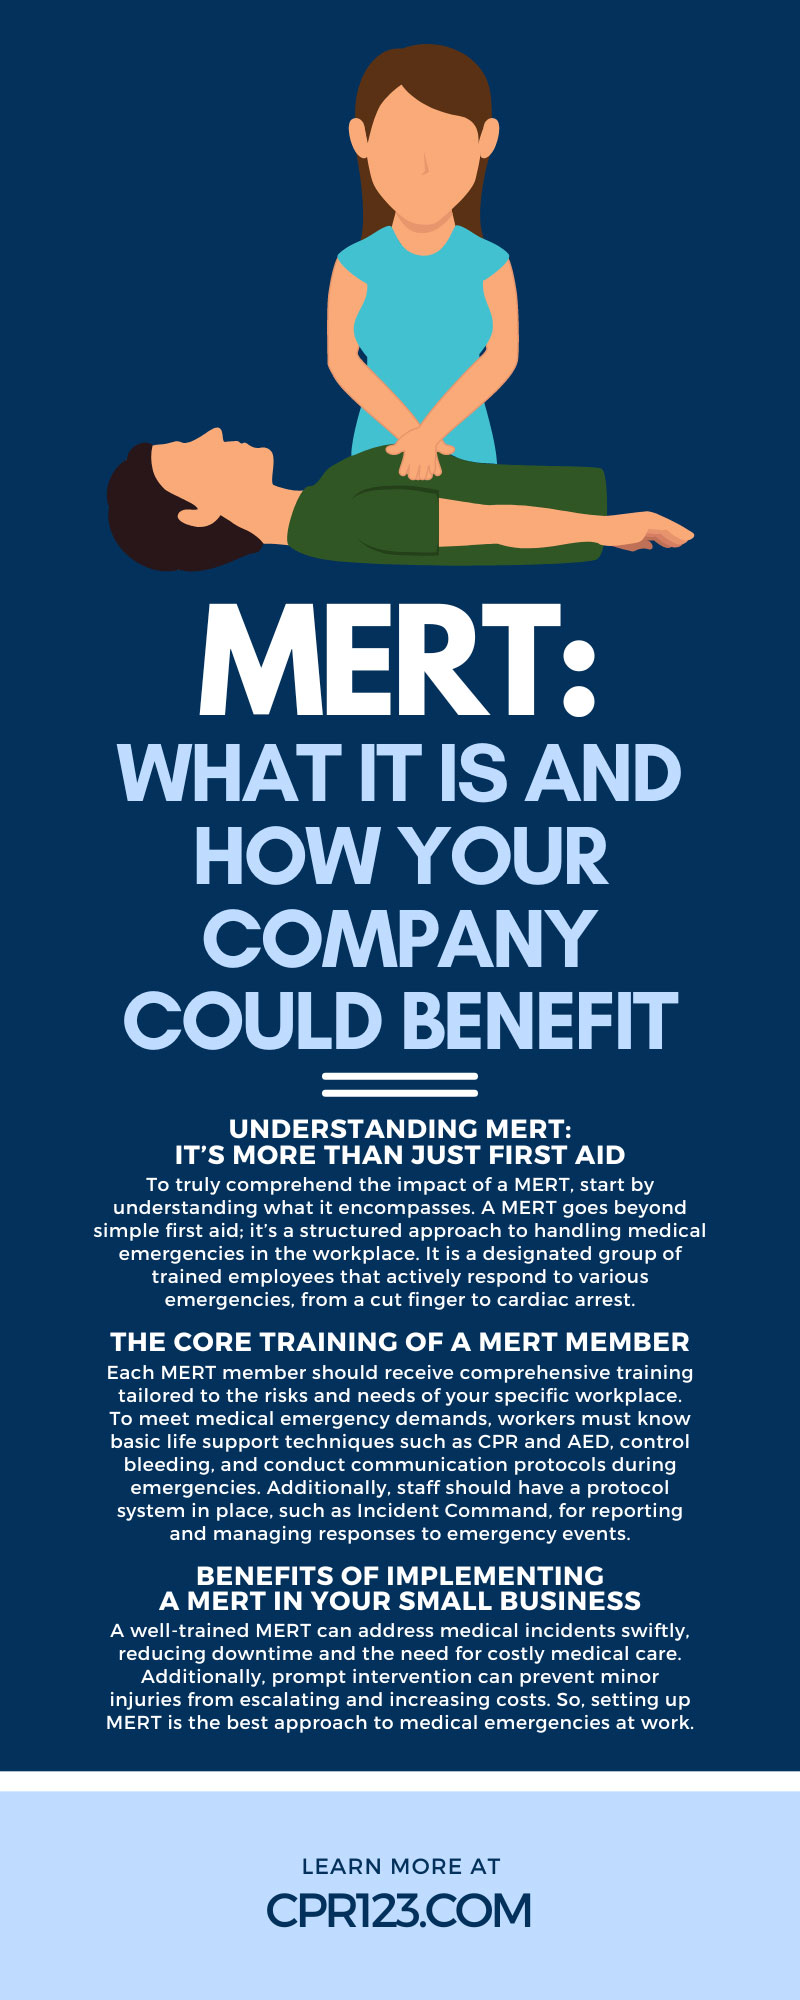 MERT: What It Is and How Your Company Could Benefit